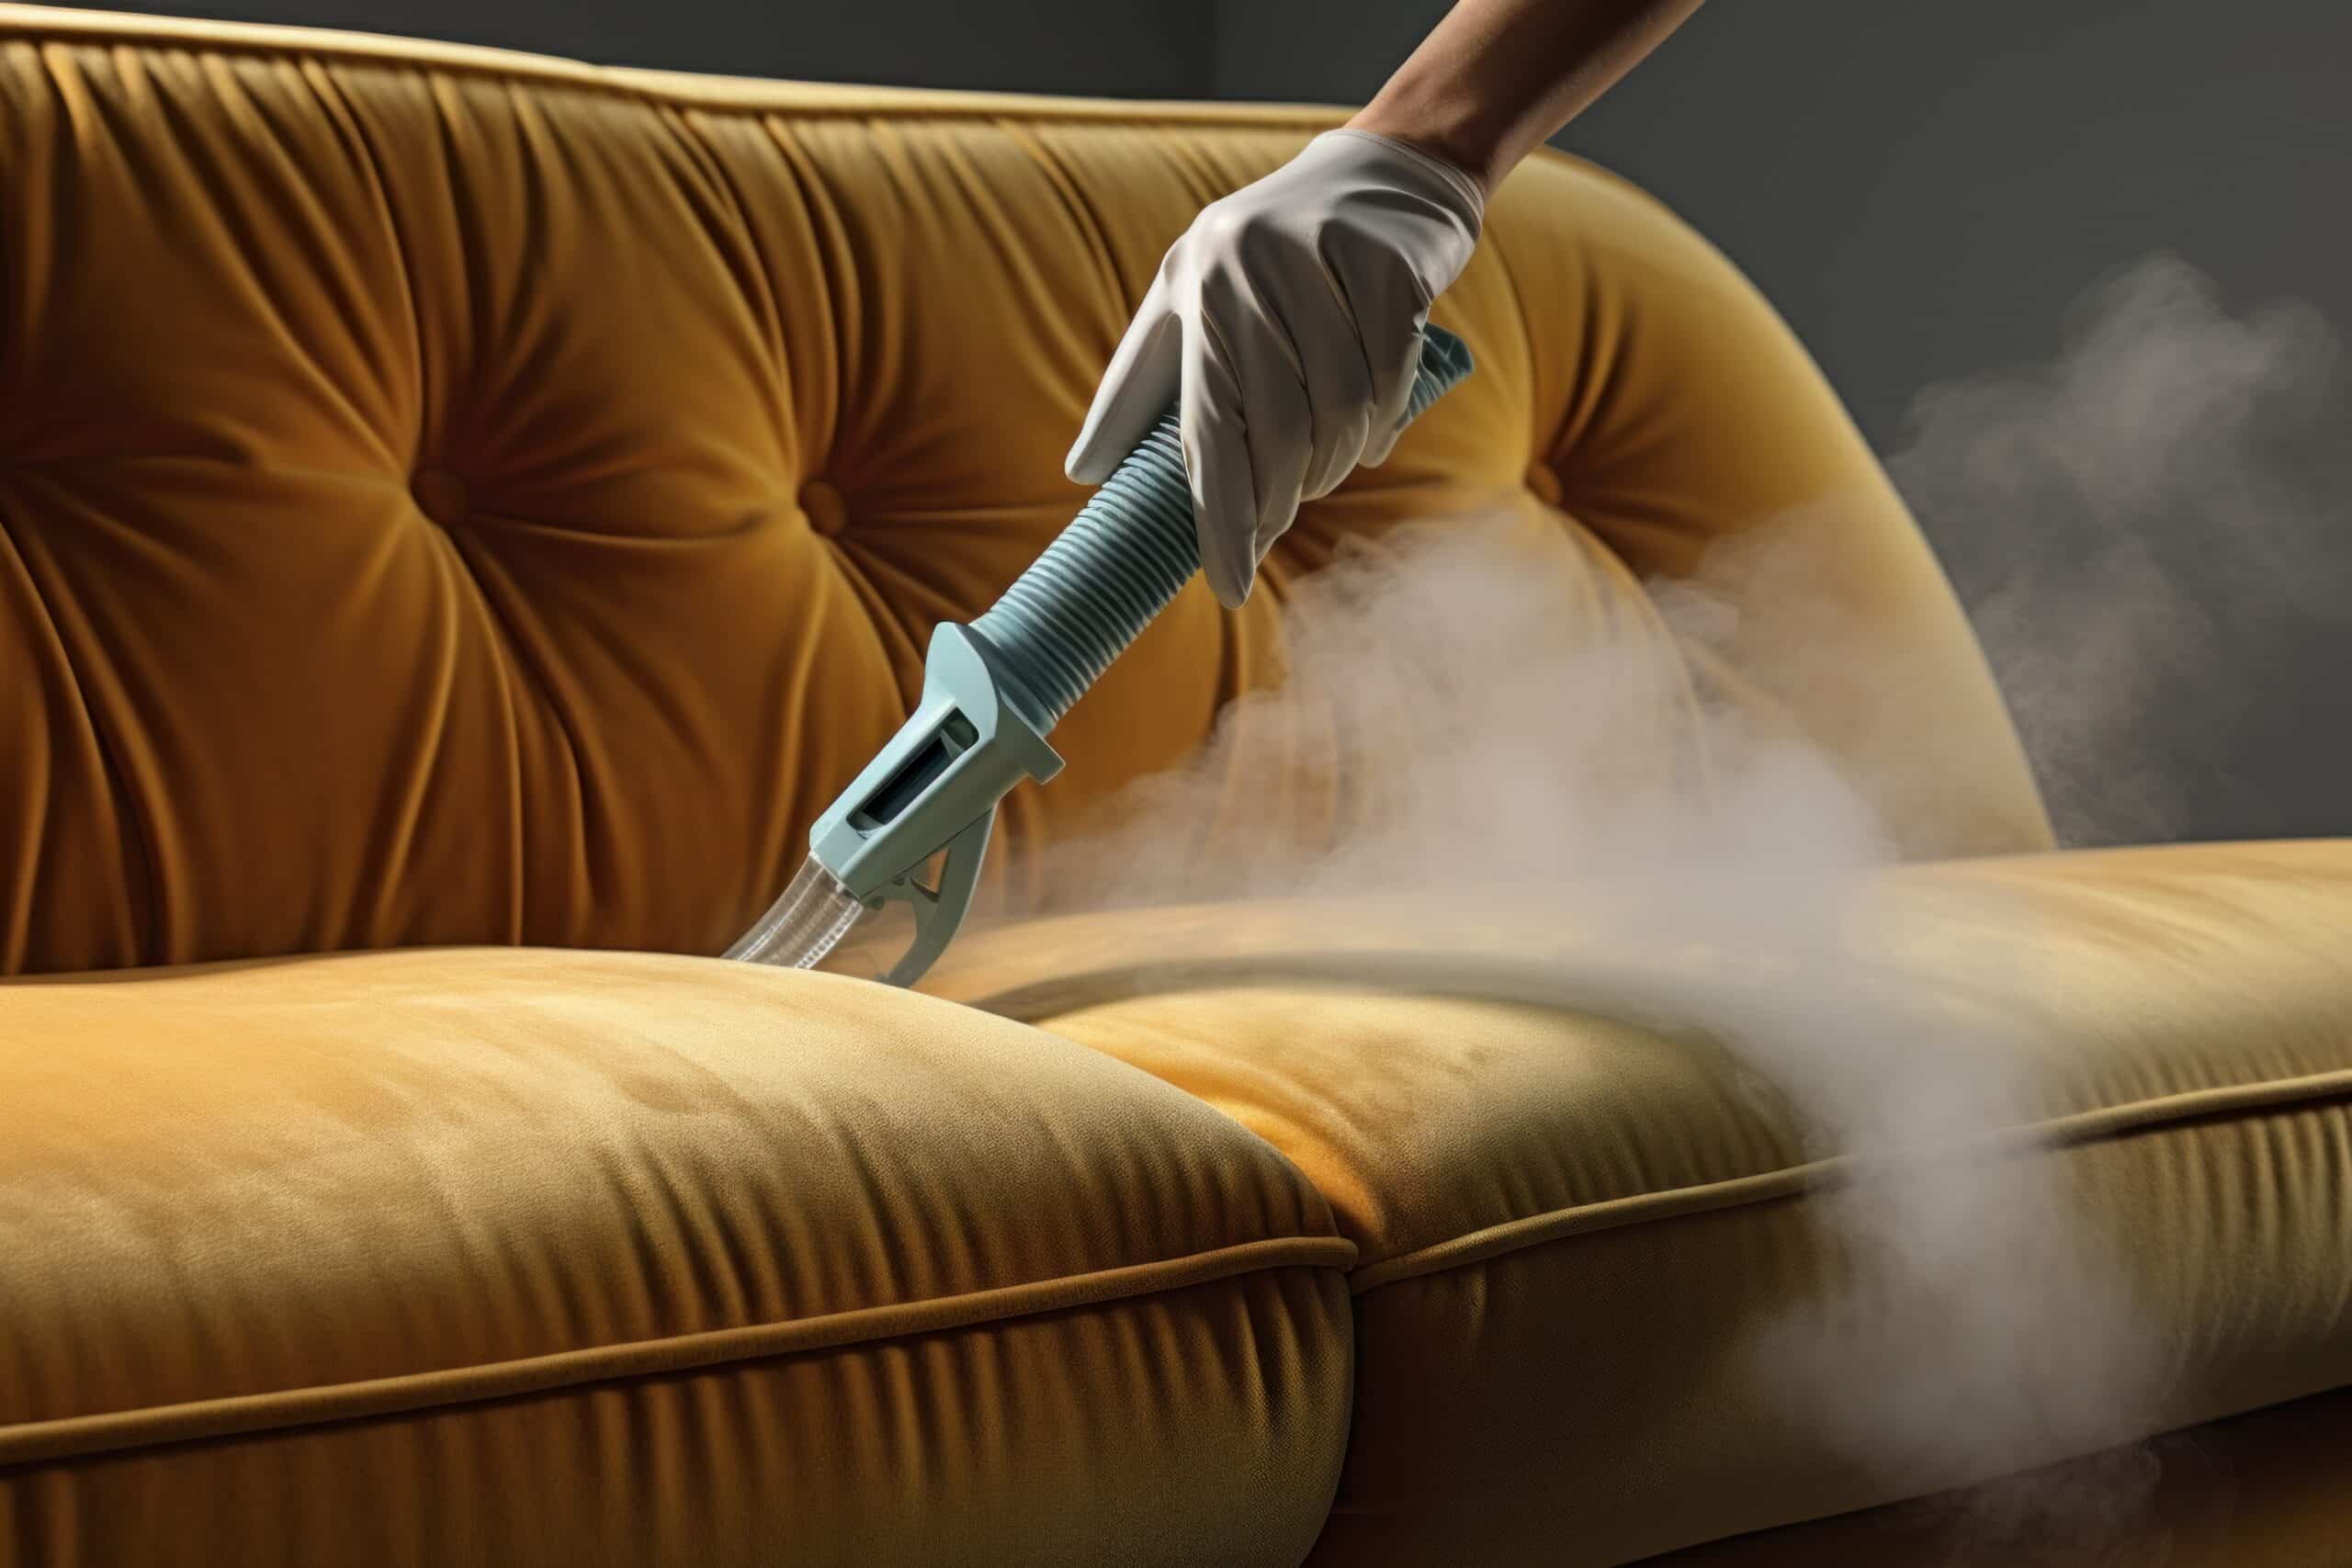 www.appr.com : Can a steam cleaner damage my upholstery or carpet if used improperly?